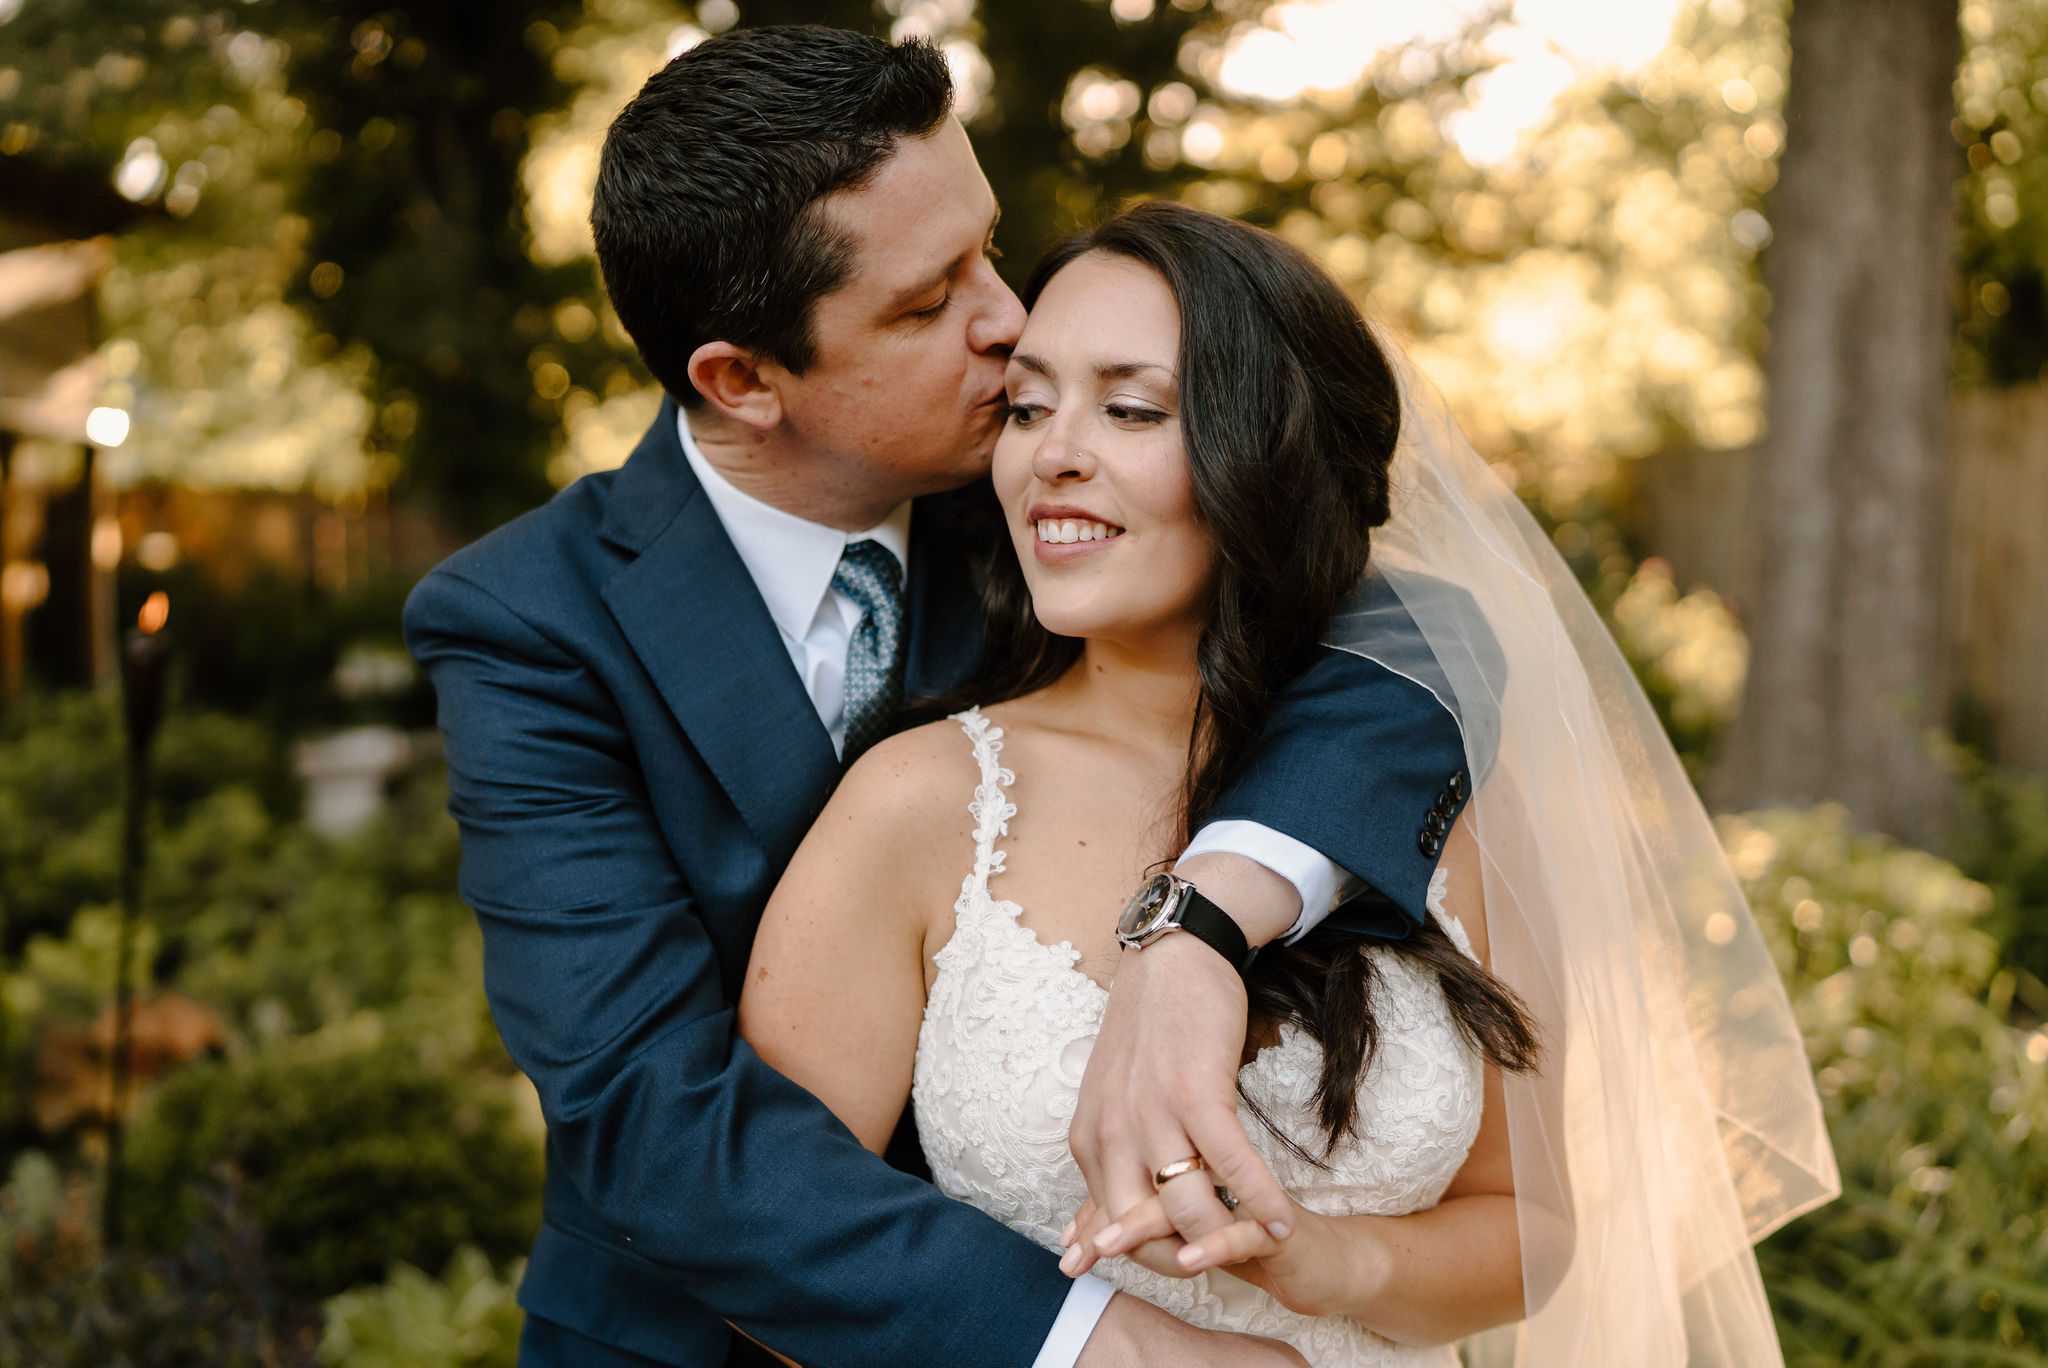 Greensboro bridal photos with gorgeous bride and groom in an intimate outdoor wedding setting
